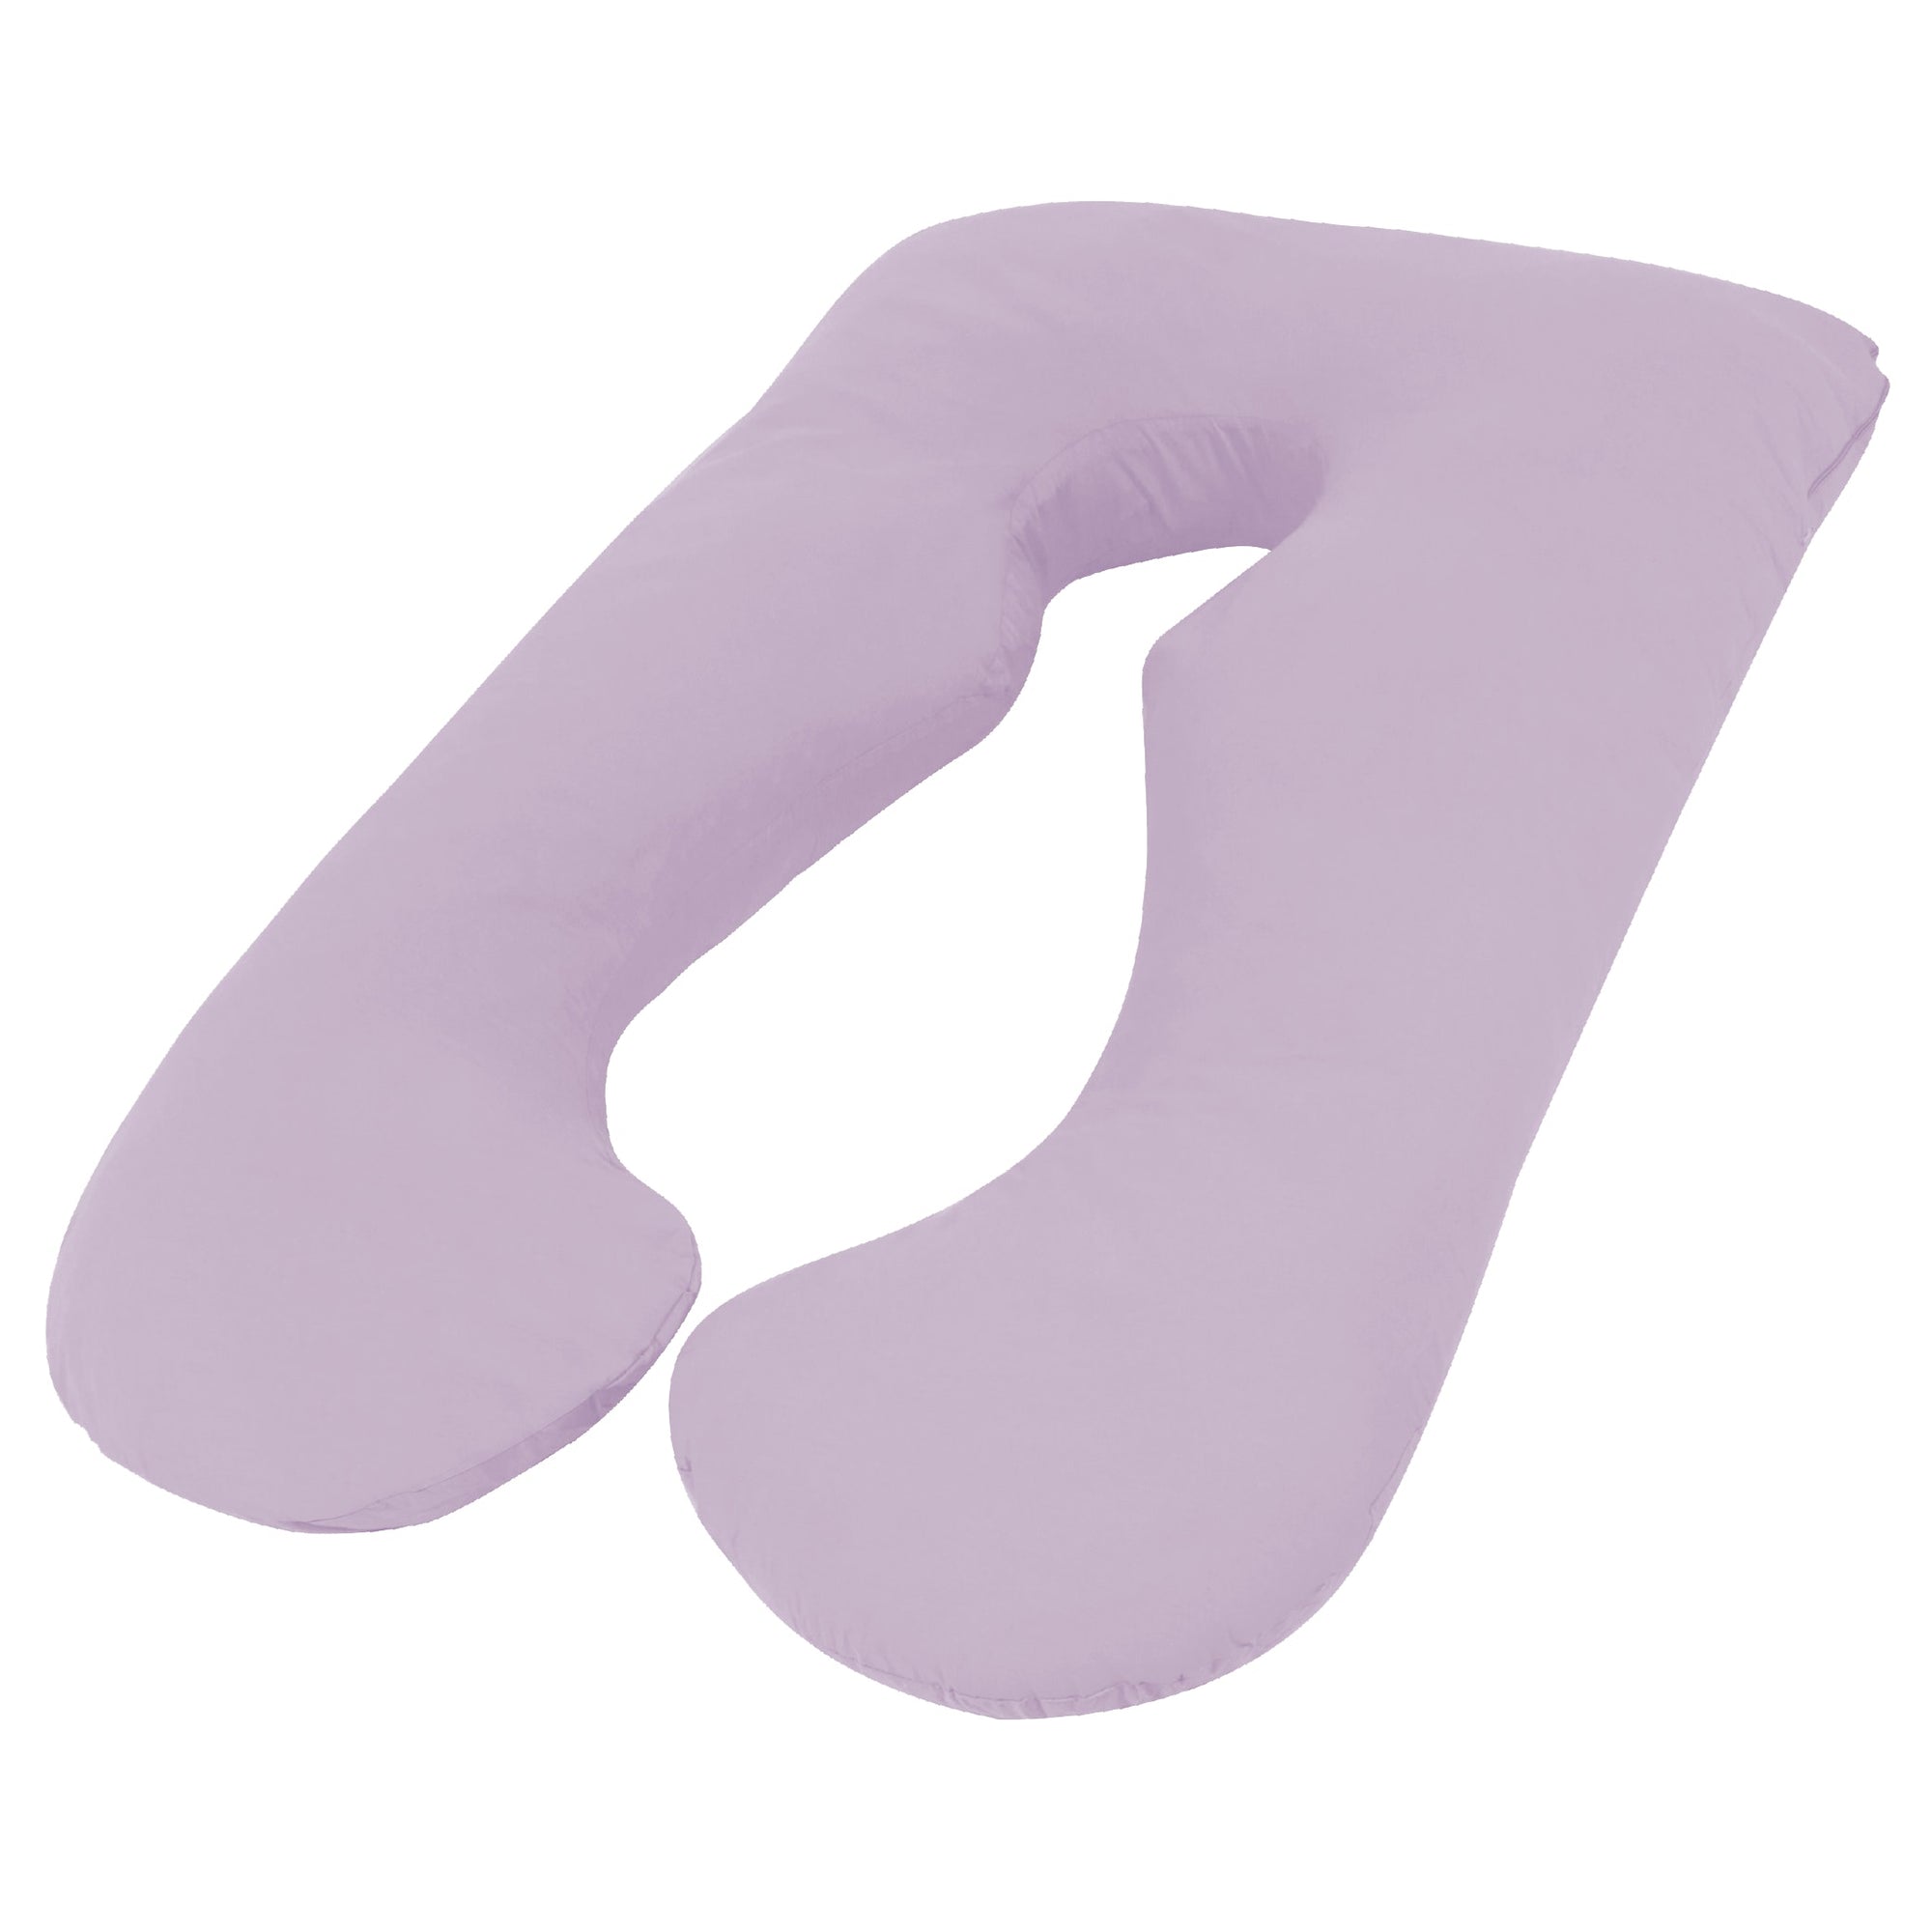 Woolcomfort Aus Made Maternity Pregnancy Nursing Sleeping Body Pillow - Lilac (Pillowcase Included)